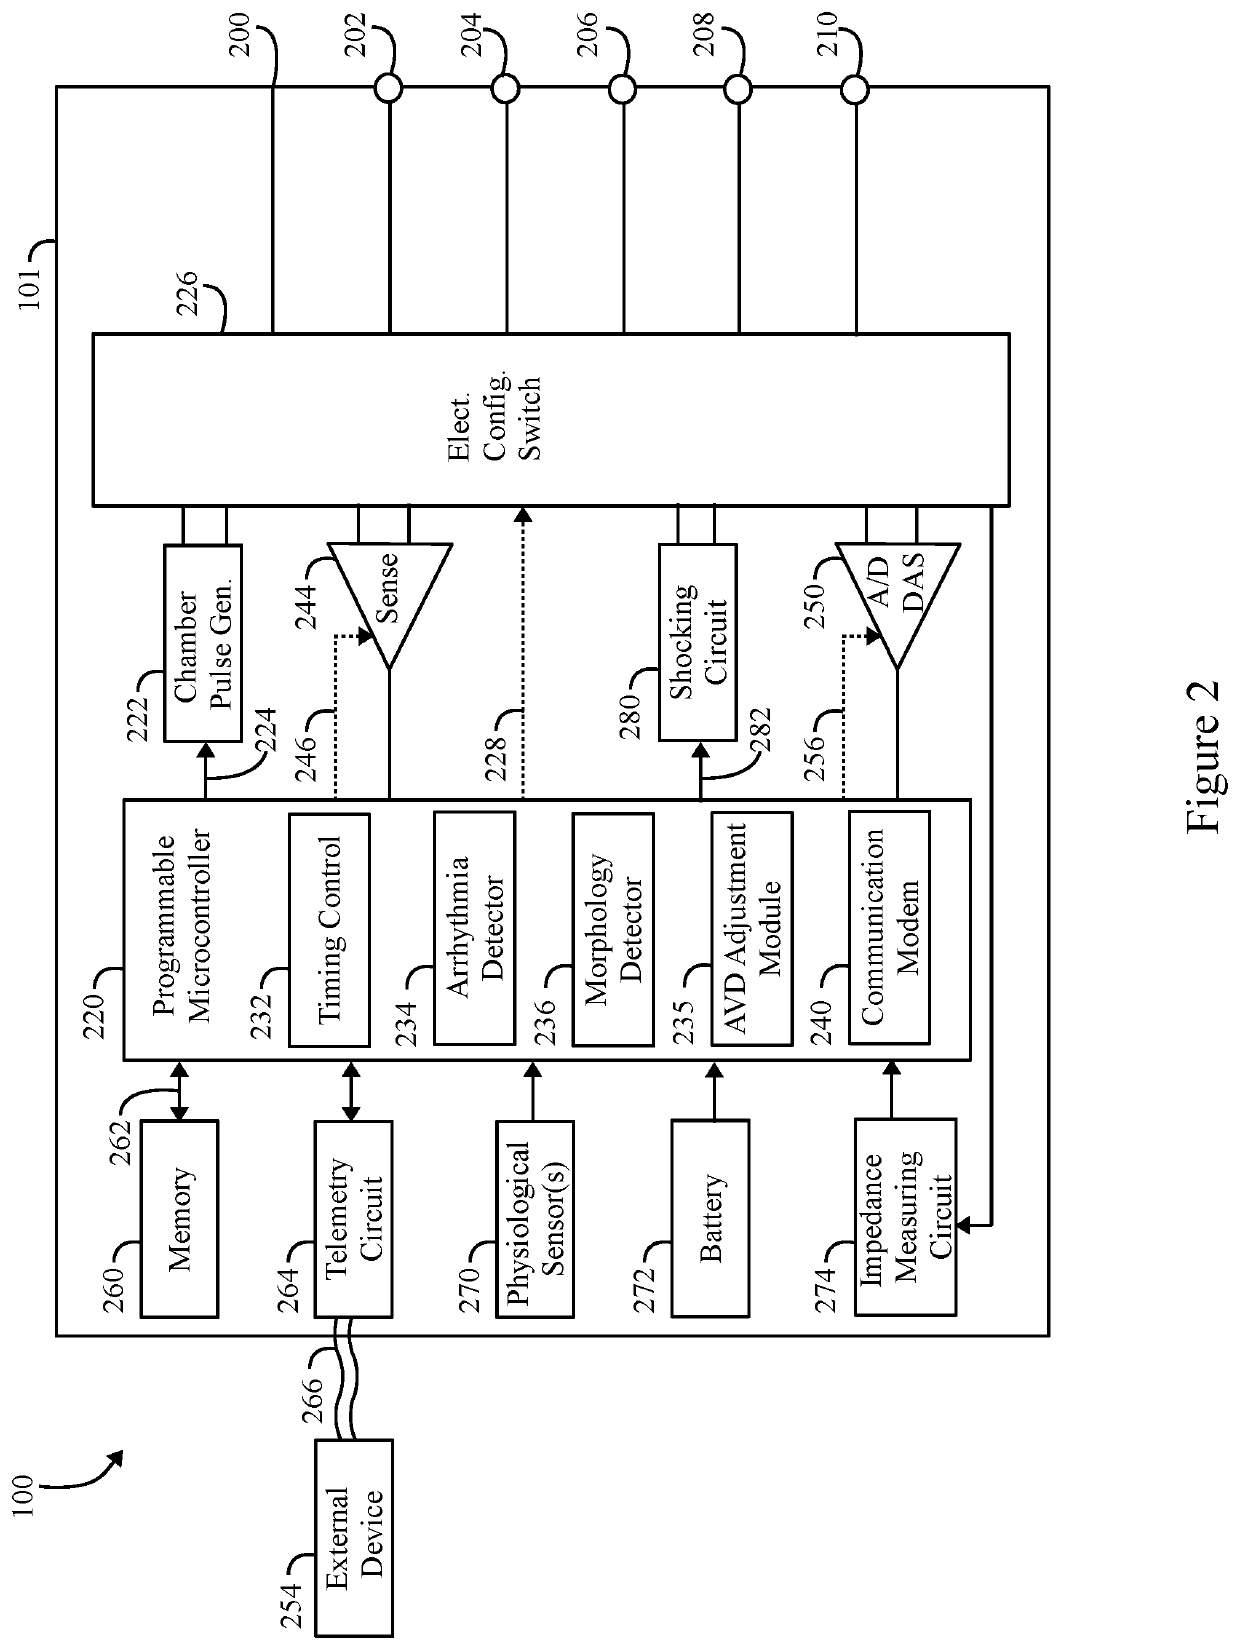 Method and system for dynamic device-based delay adjustment